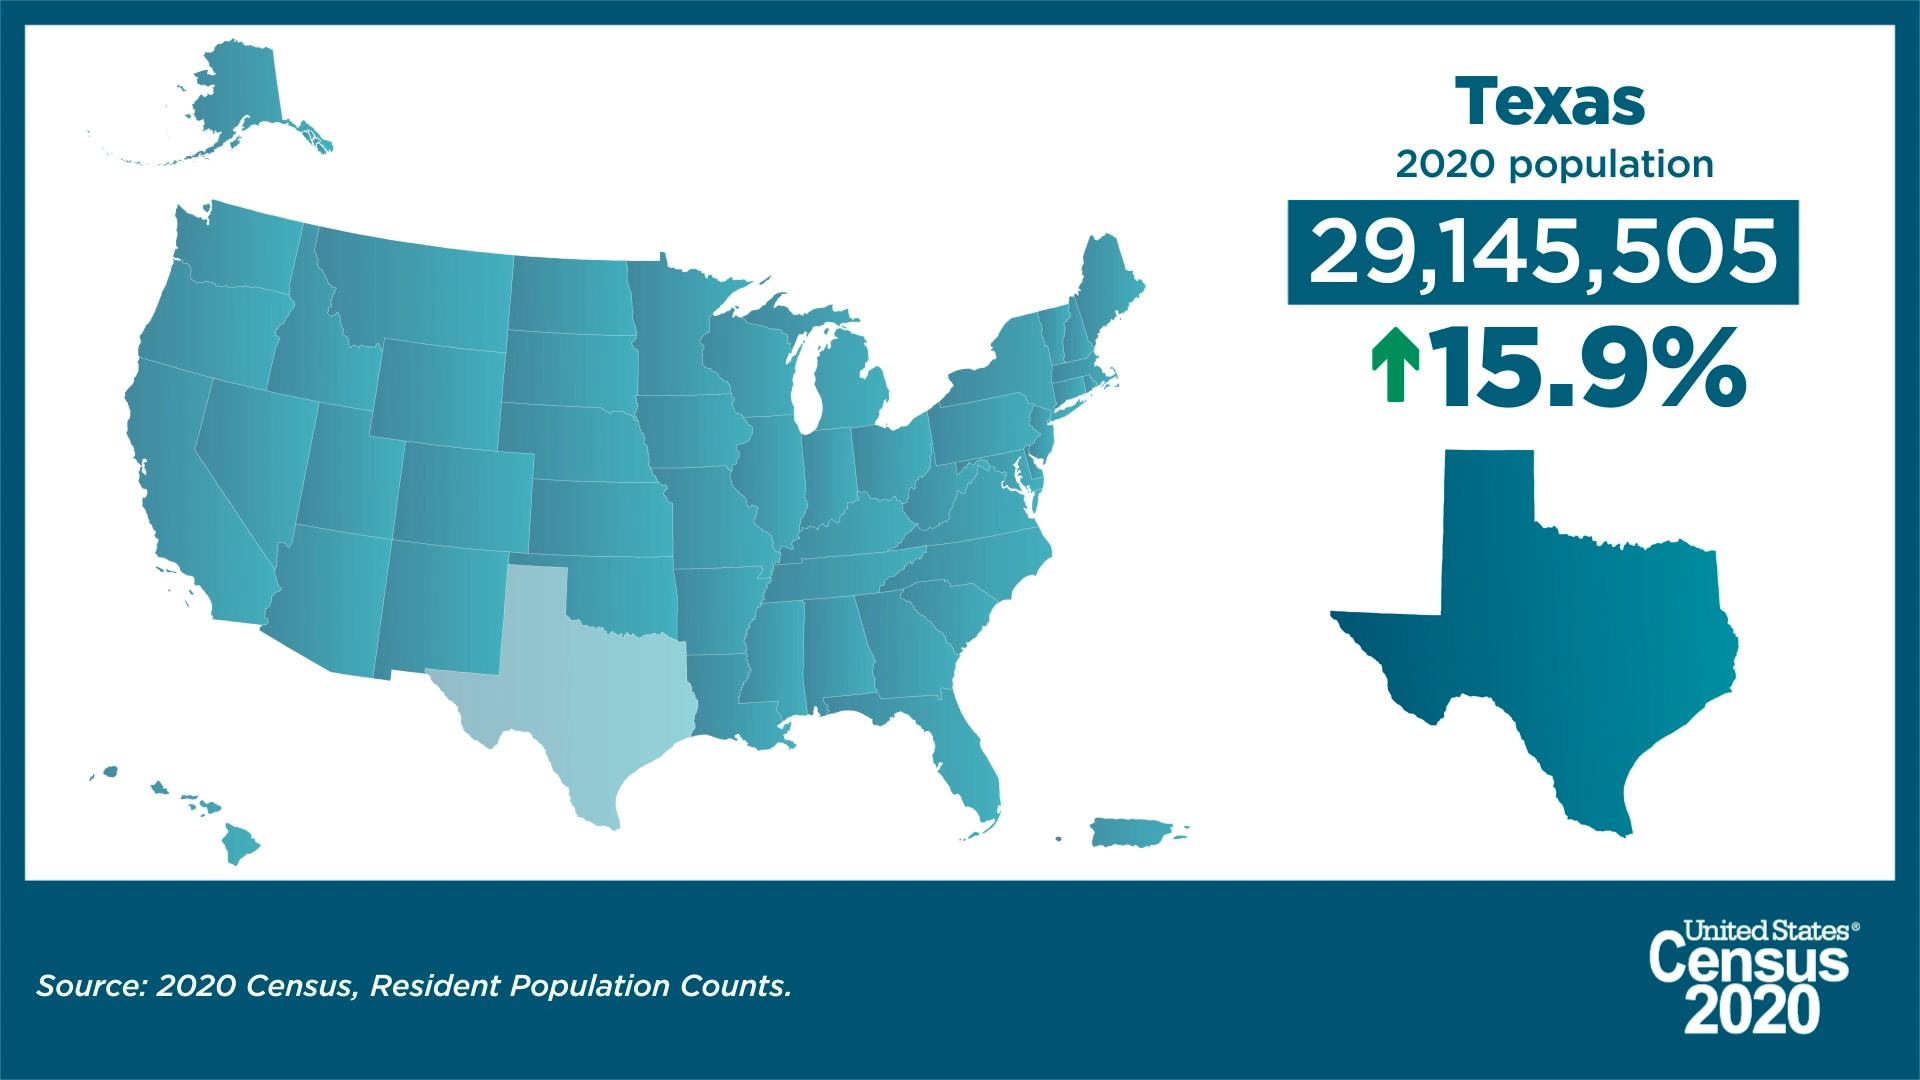 Texas 2020 population: 29,145,505; up 15.9% from 2010